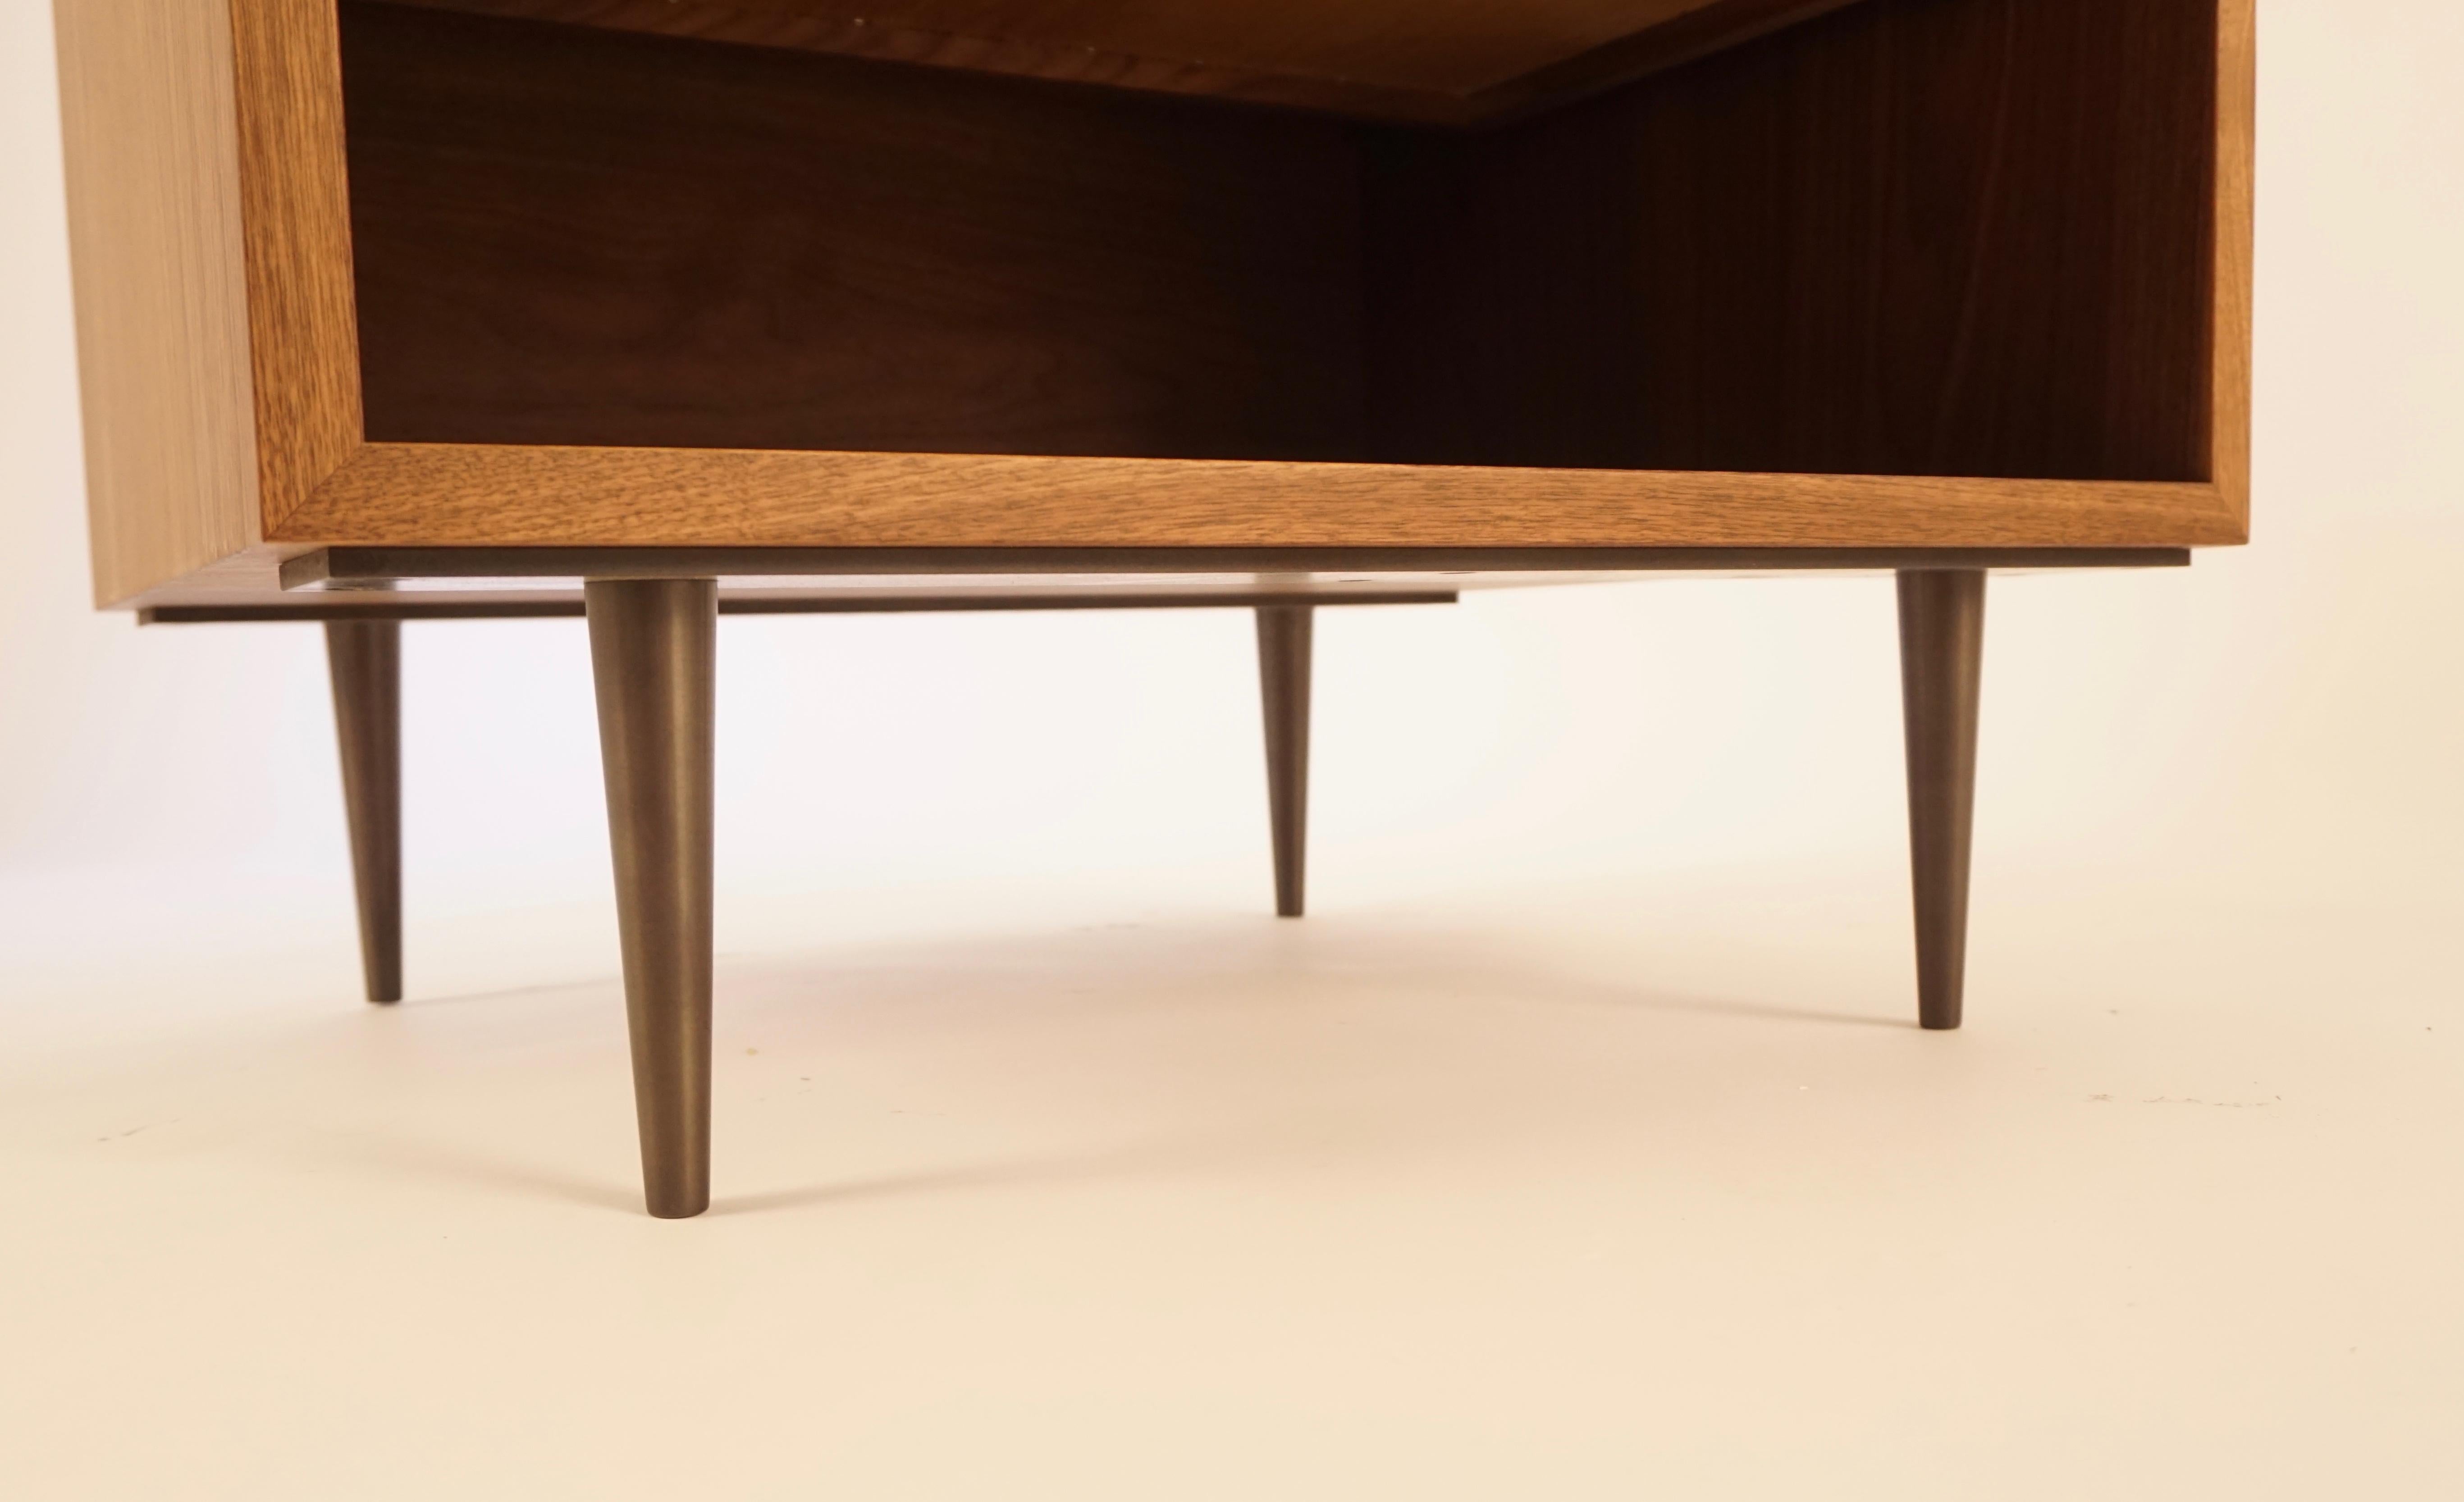 Blackened Walnut Bedside Table with Natural Edged Drawer-Fronts by Chris Lehrecke For Sale